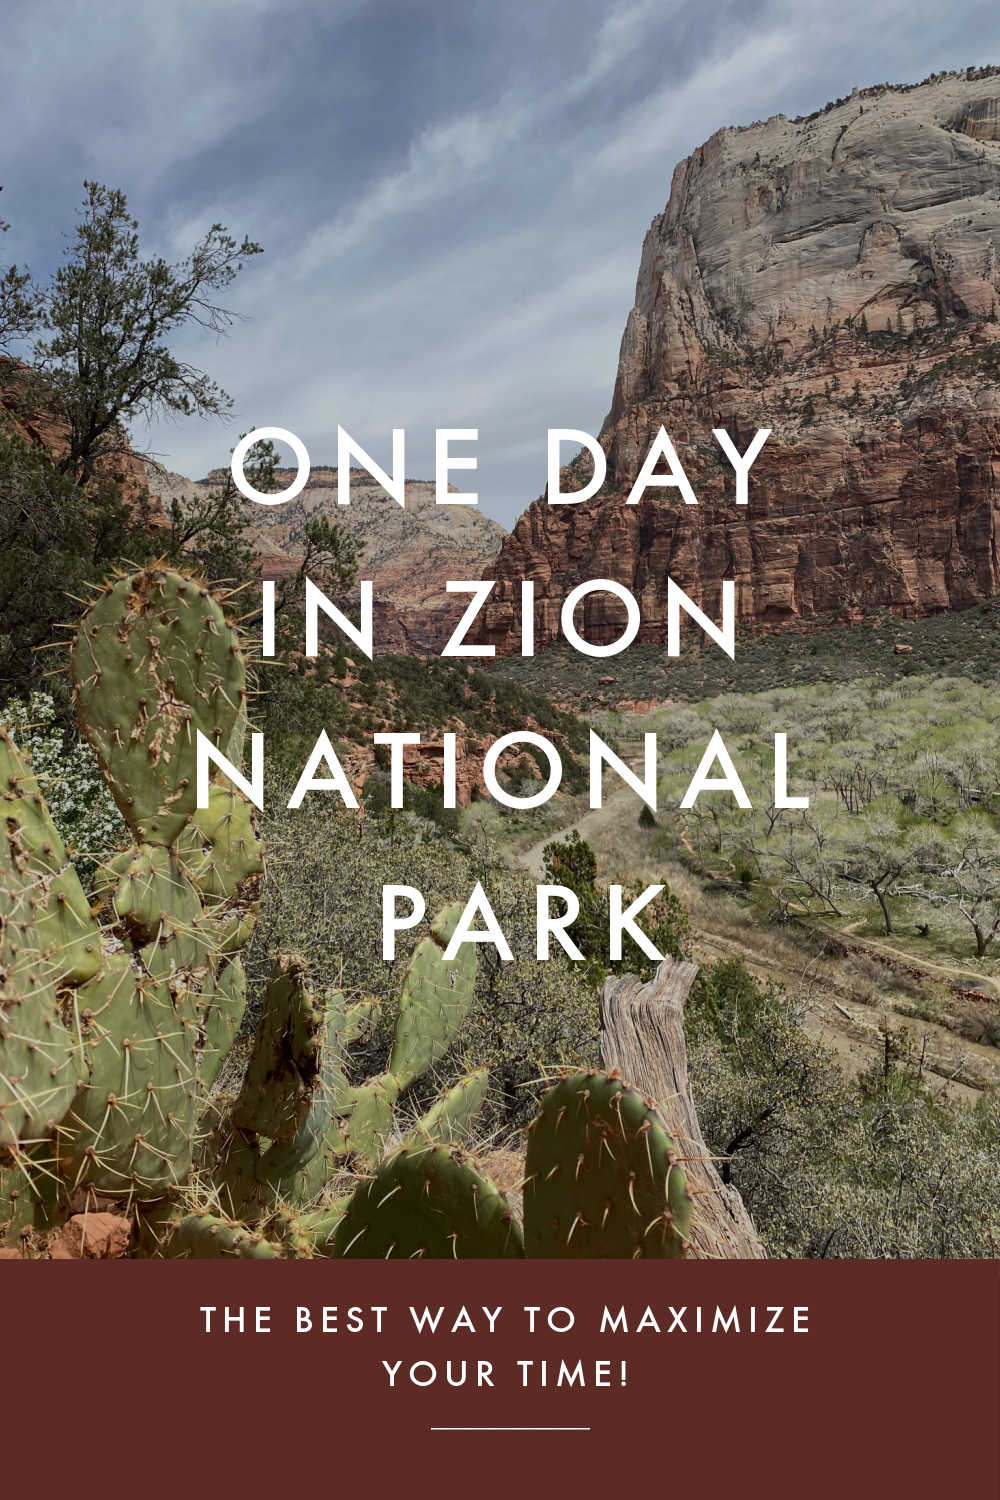 ONE DAY ZION NATIONAL PARK